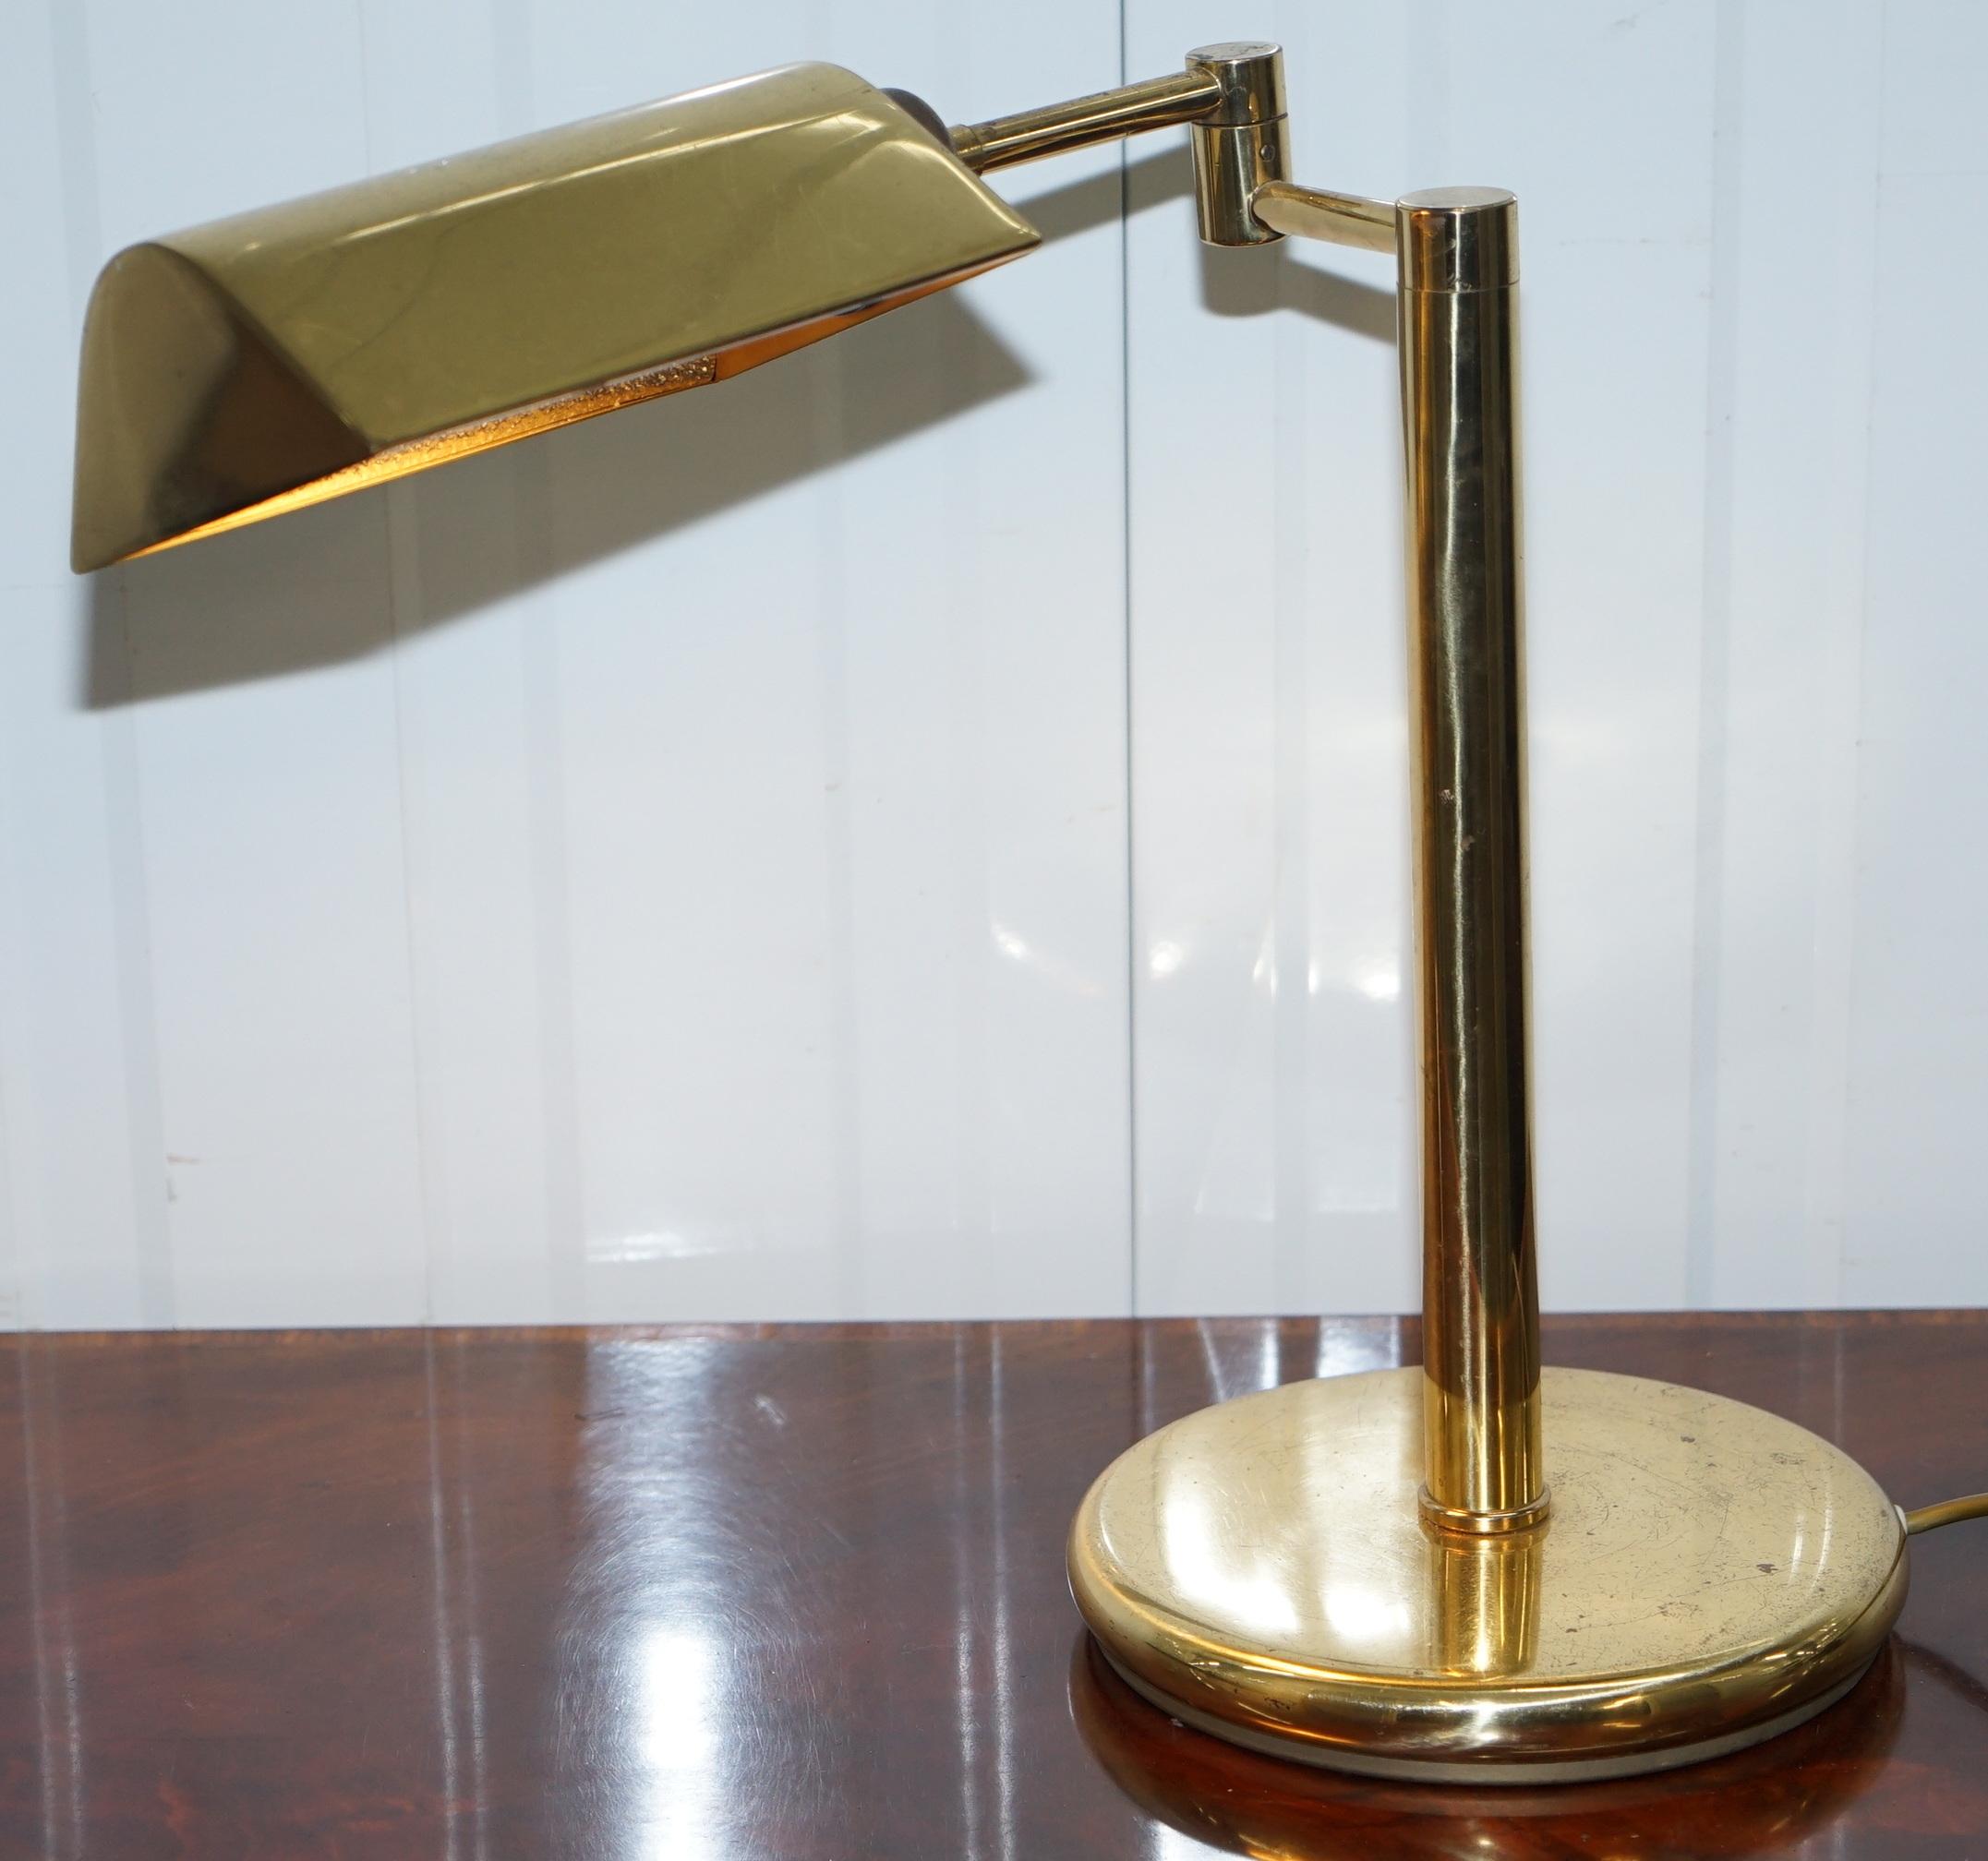 We are delighted to offer for sale this lovely made in England vintage Bankers lamp with adjustable arm and shade 

A nice piece with a genuine vintage patina to the brass, the shade turns and is fully adjustable, the arm is articulated and allows